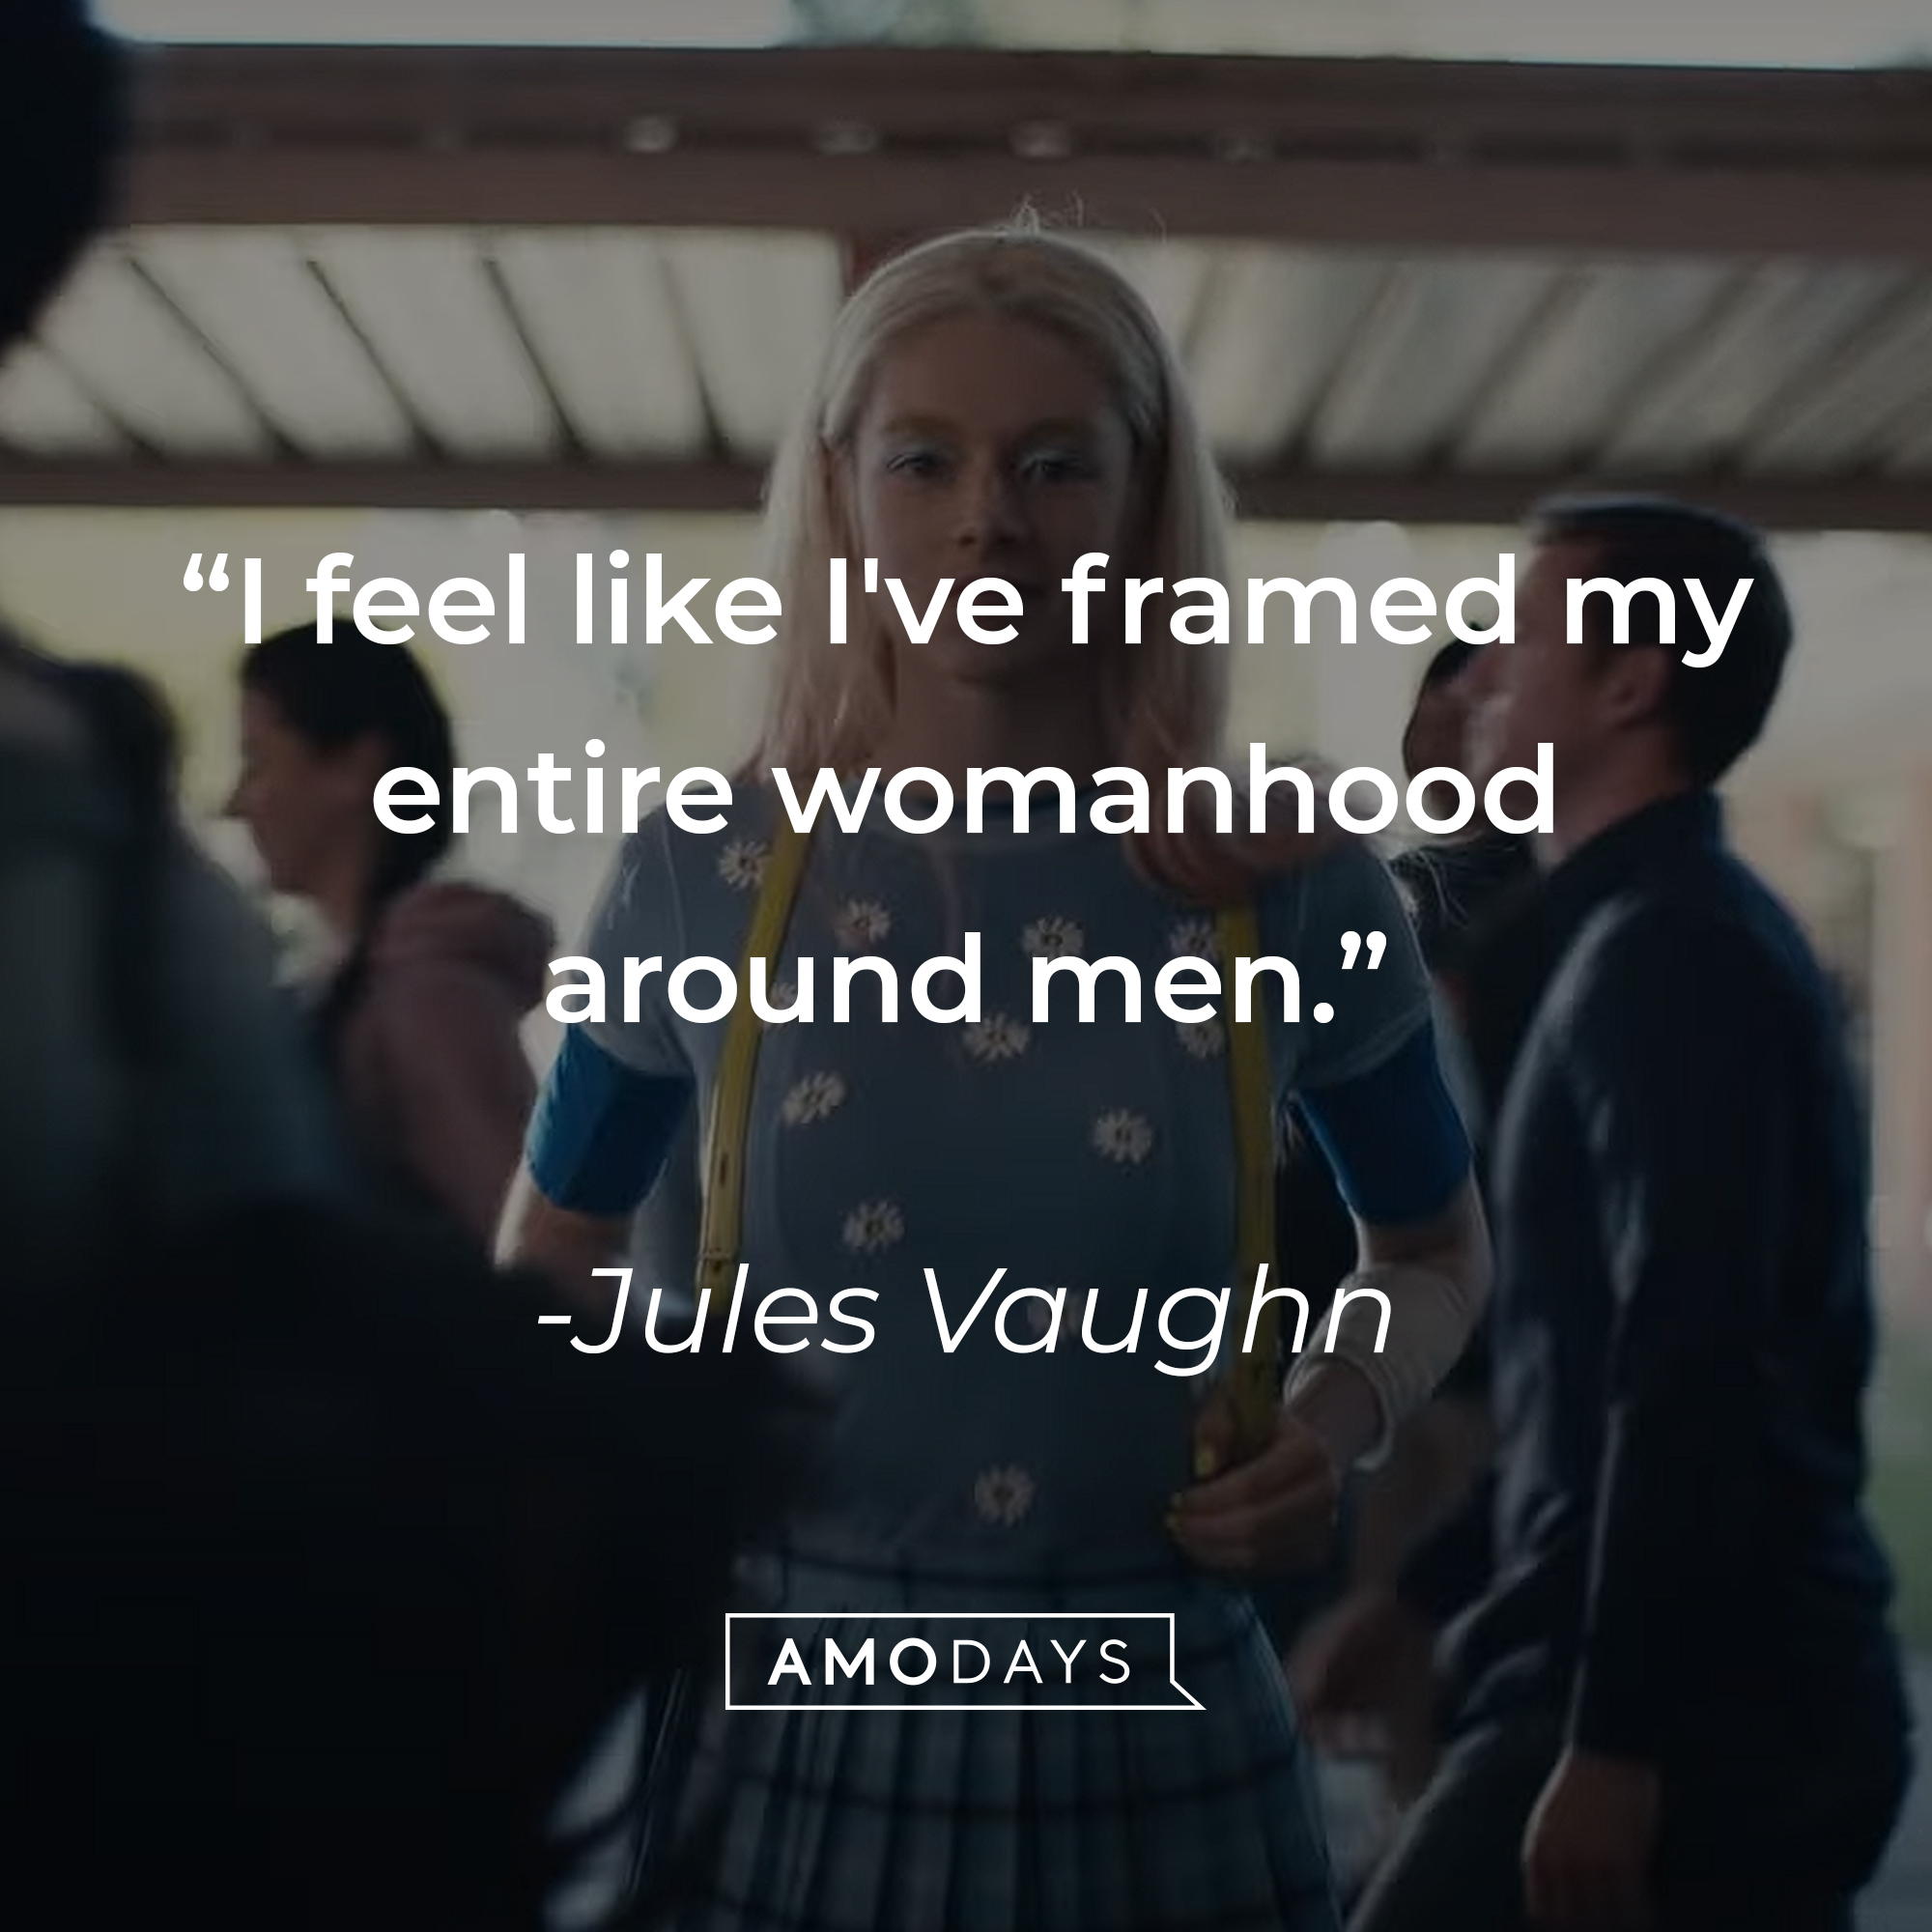 Jules Vaughn with her quote: "I feel like I've framed my entire womanhood around men." | Source: HBO